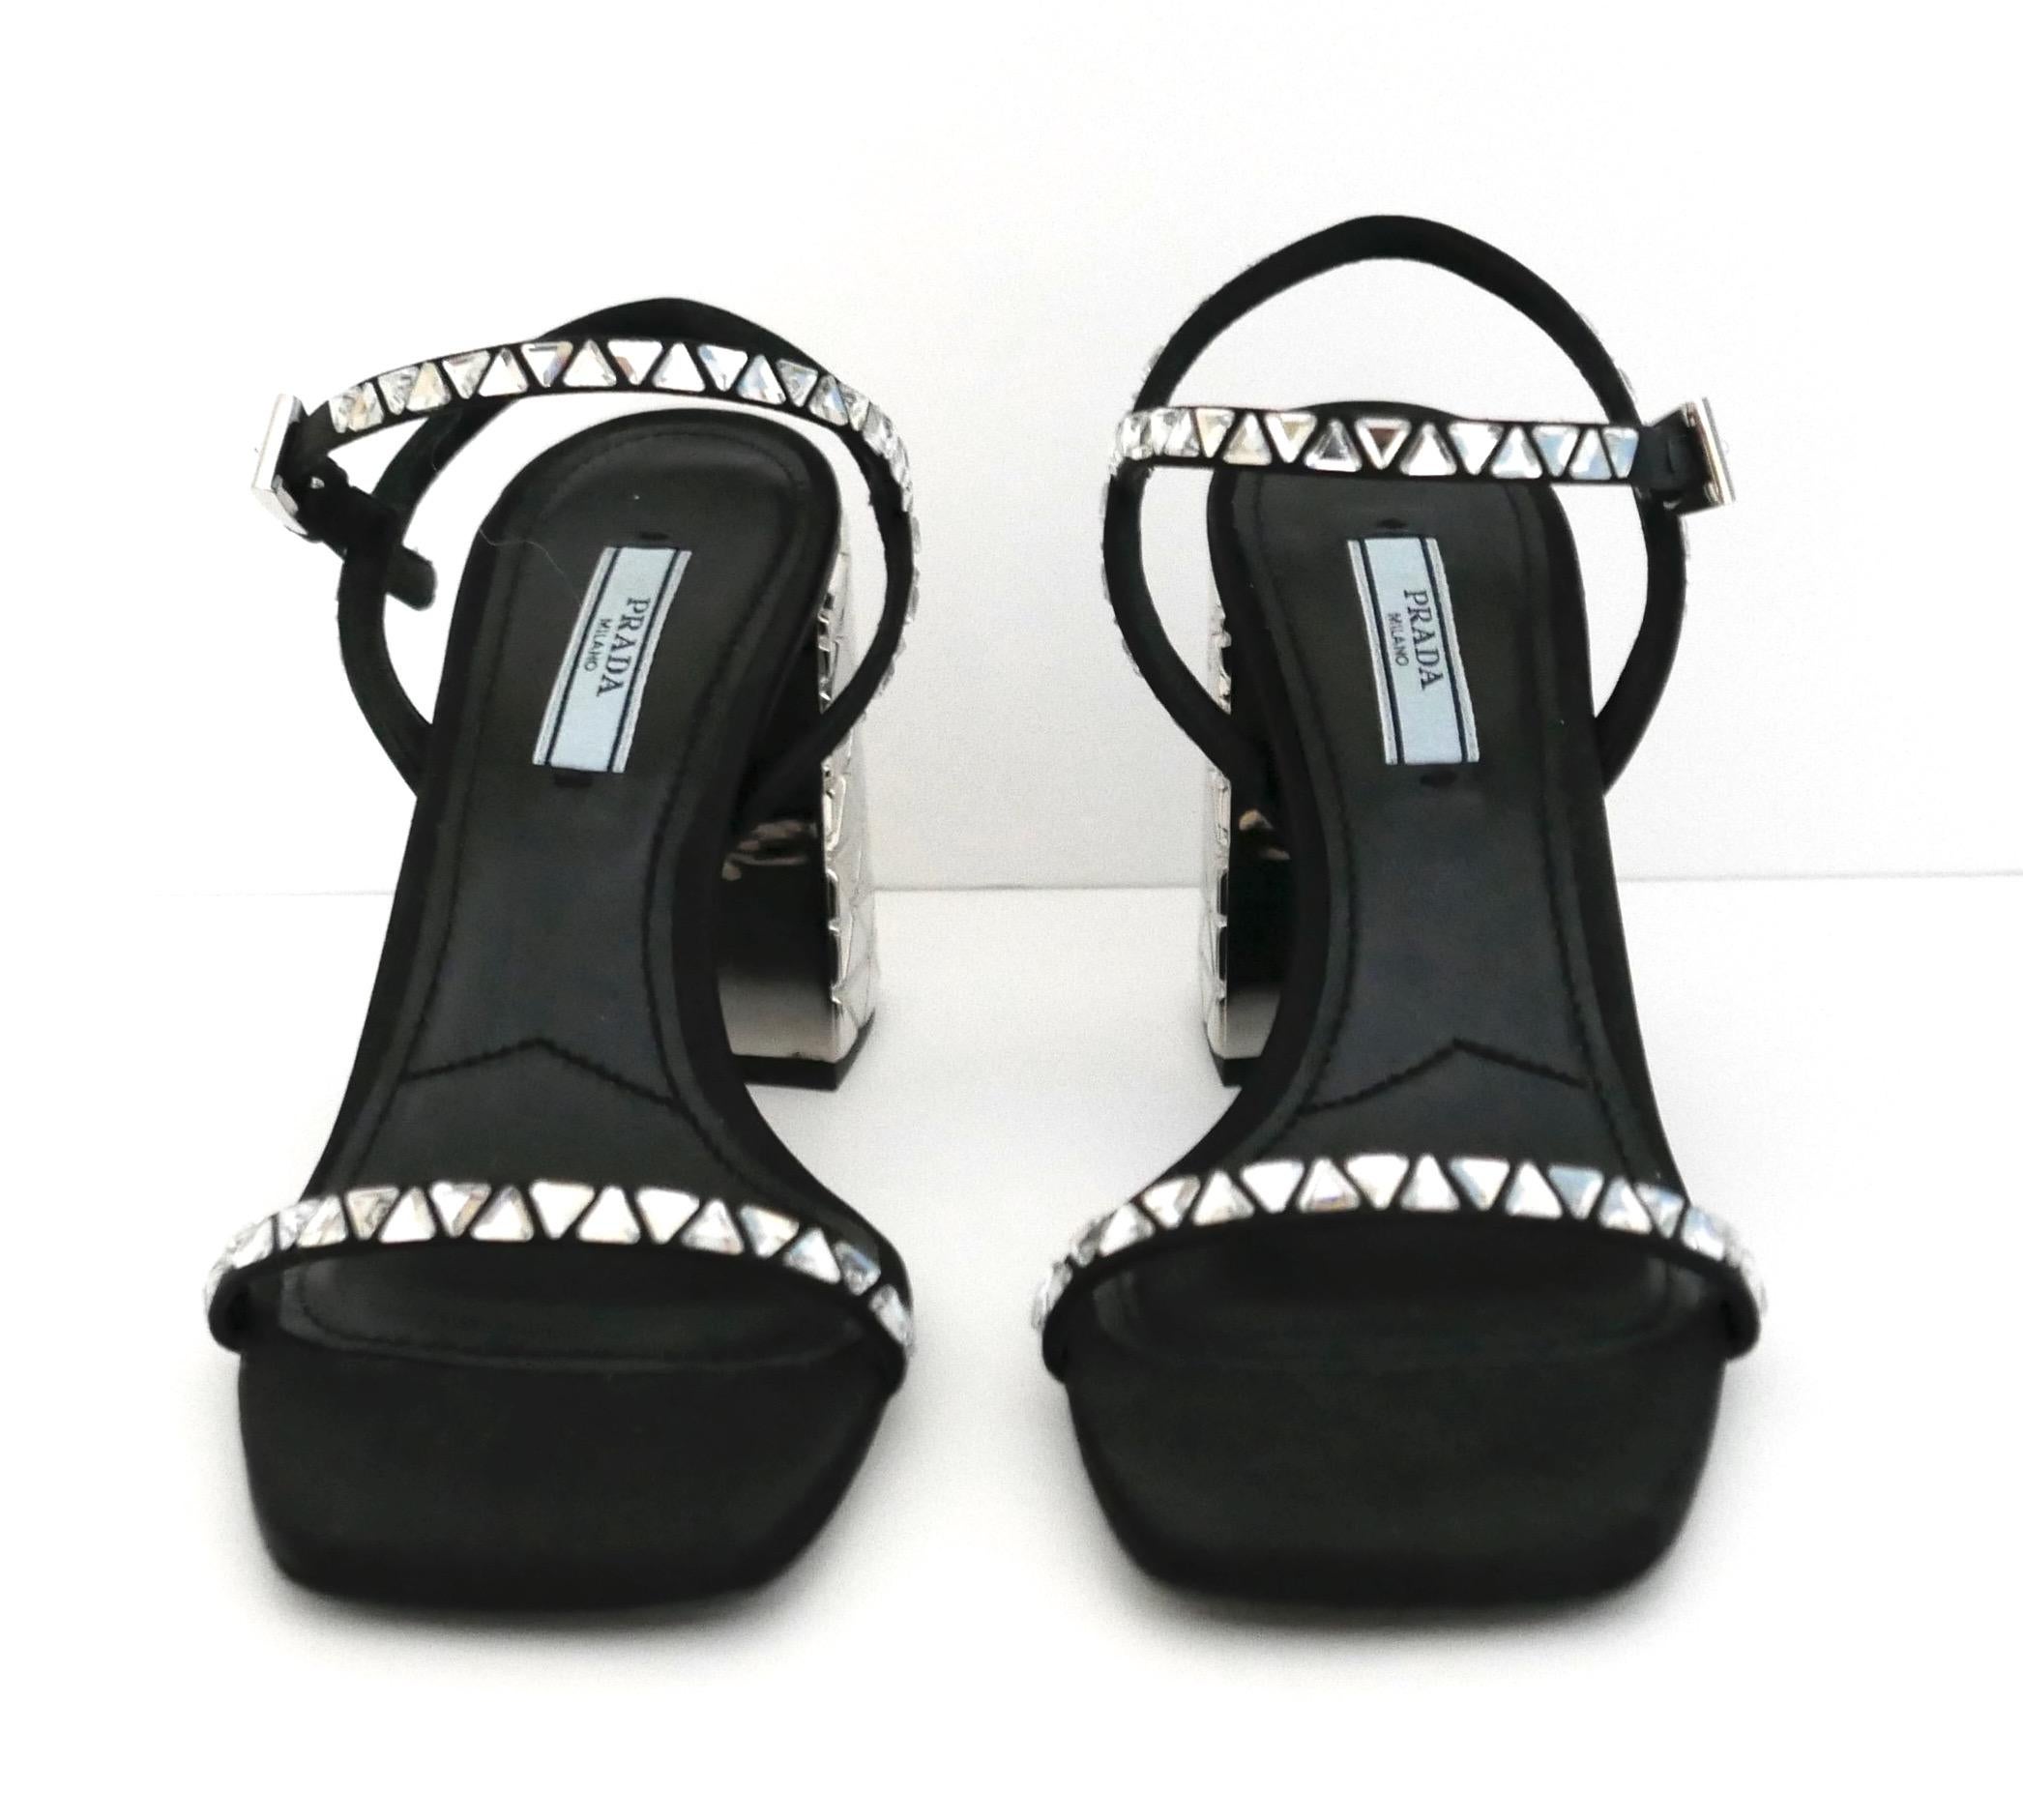 Stunning, sold out Prada crystal sandals - bought for £1200 and new with box and dustbags. Have black leather, triangle crystal studded straps and chunky disco ball inspired moulded chunky heels. Size 36/Uk3. Measure approx 9” heel to toe and heel